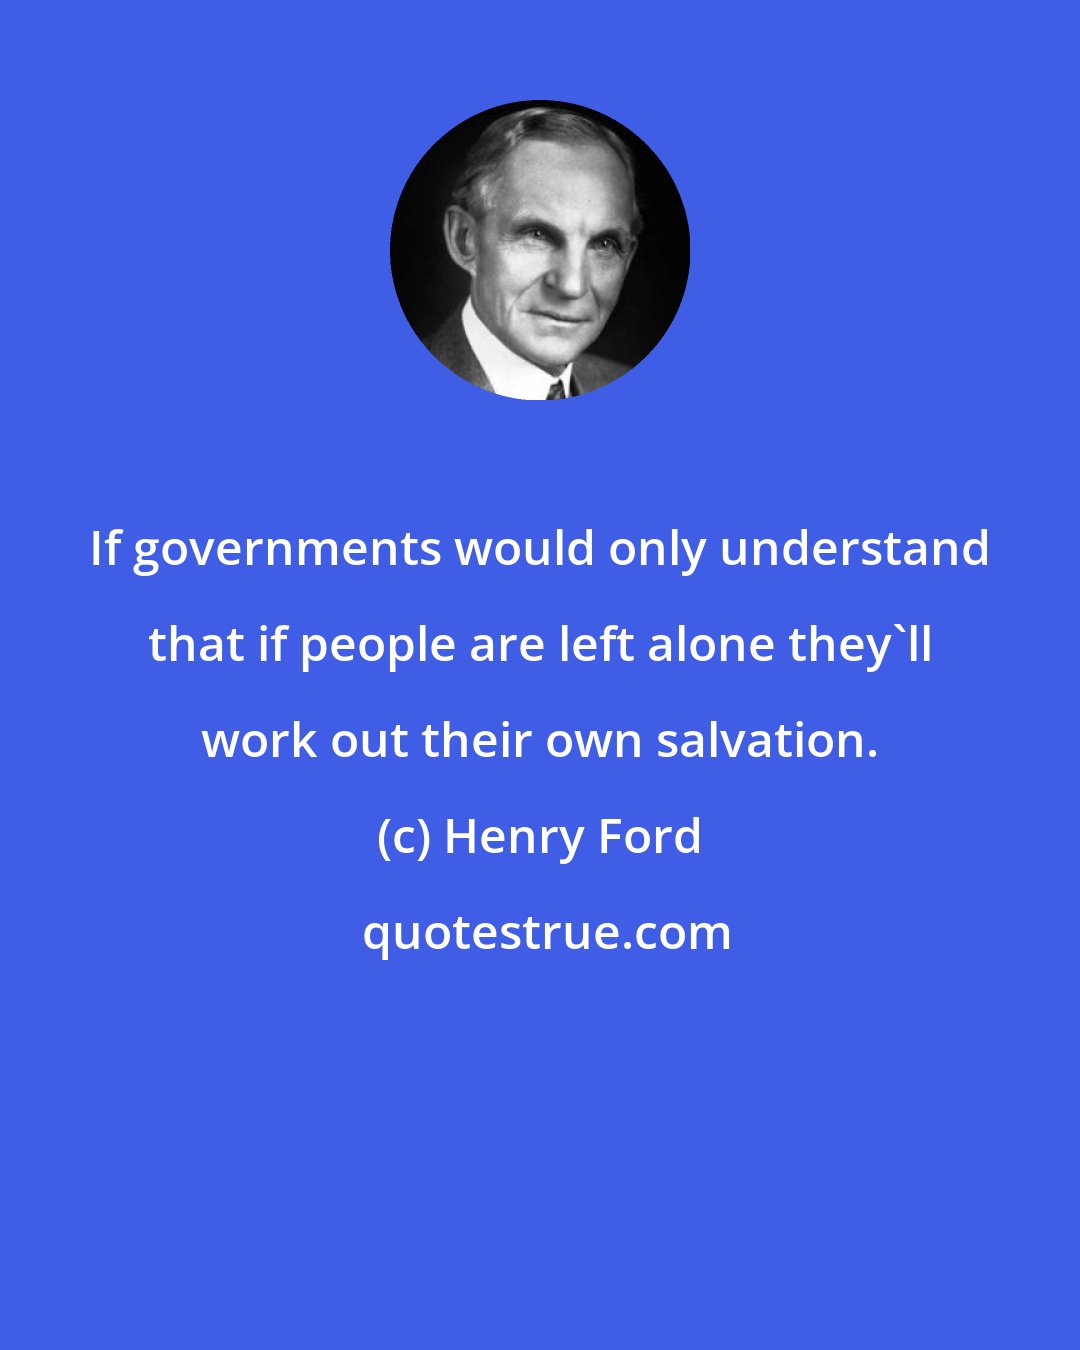 Henry Ford: If governments would only understand that if people are left alone they'll work out their own salvation.